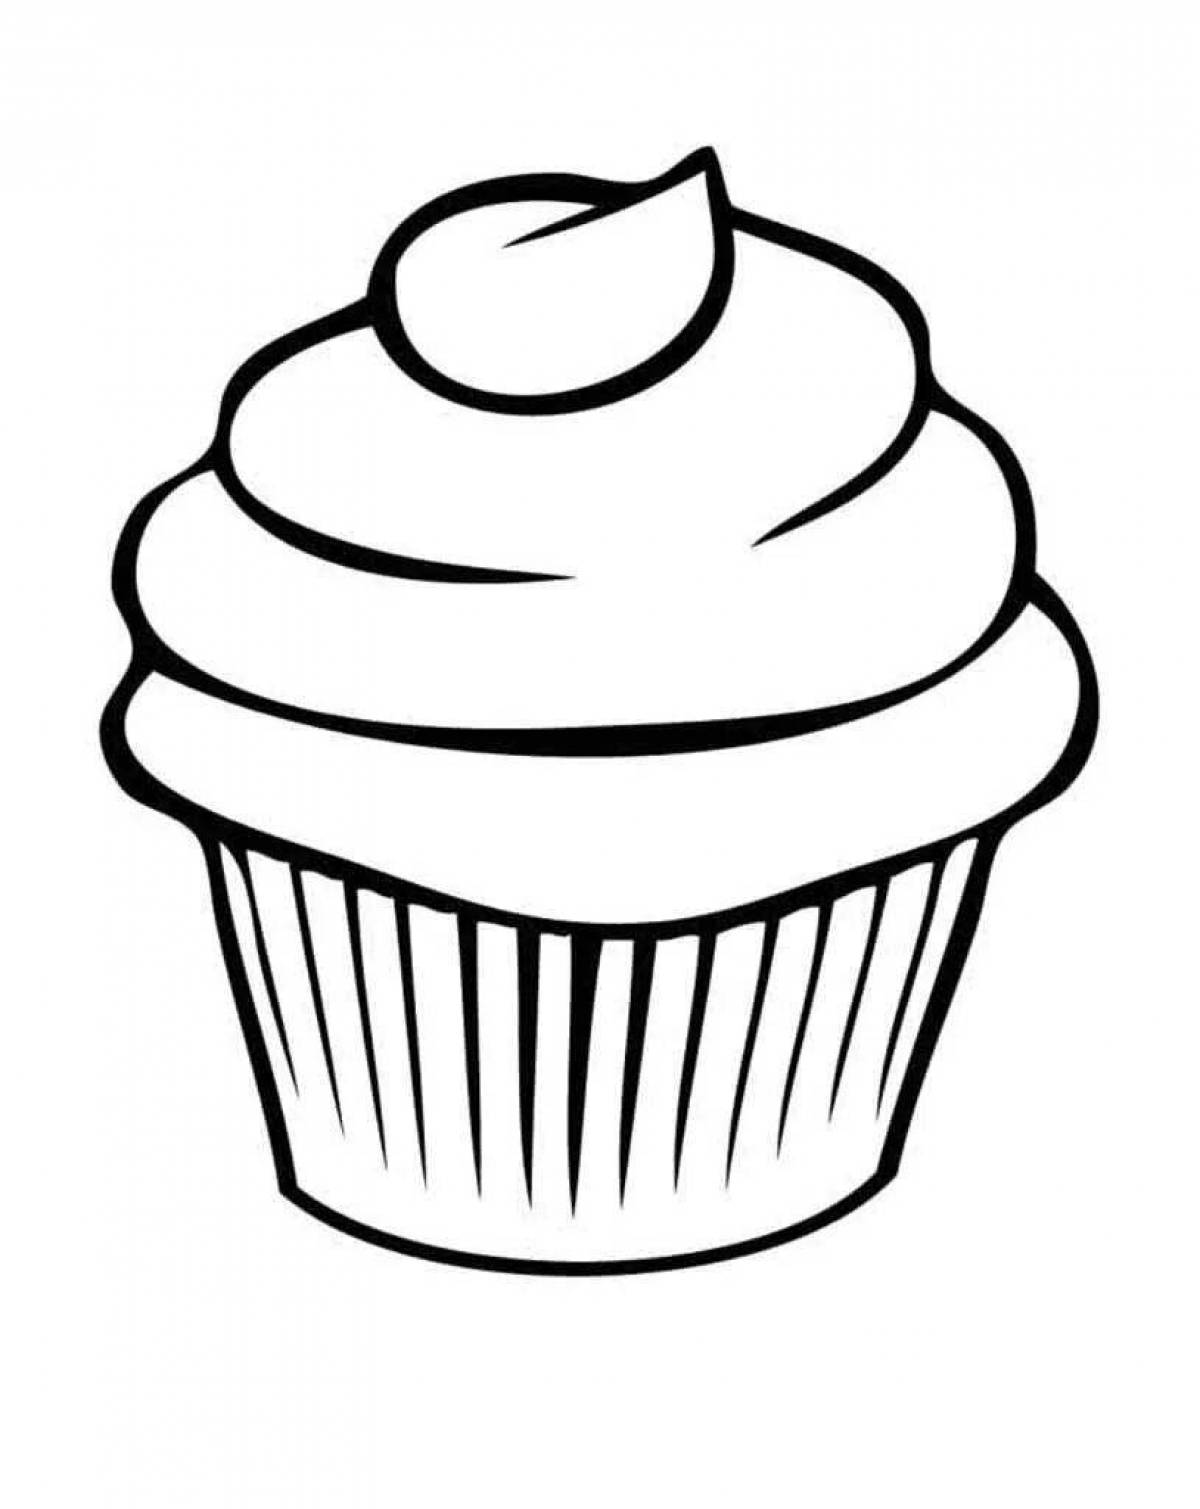 Colorful cupcake coloring book for kids